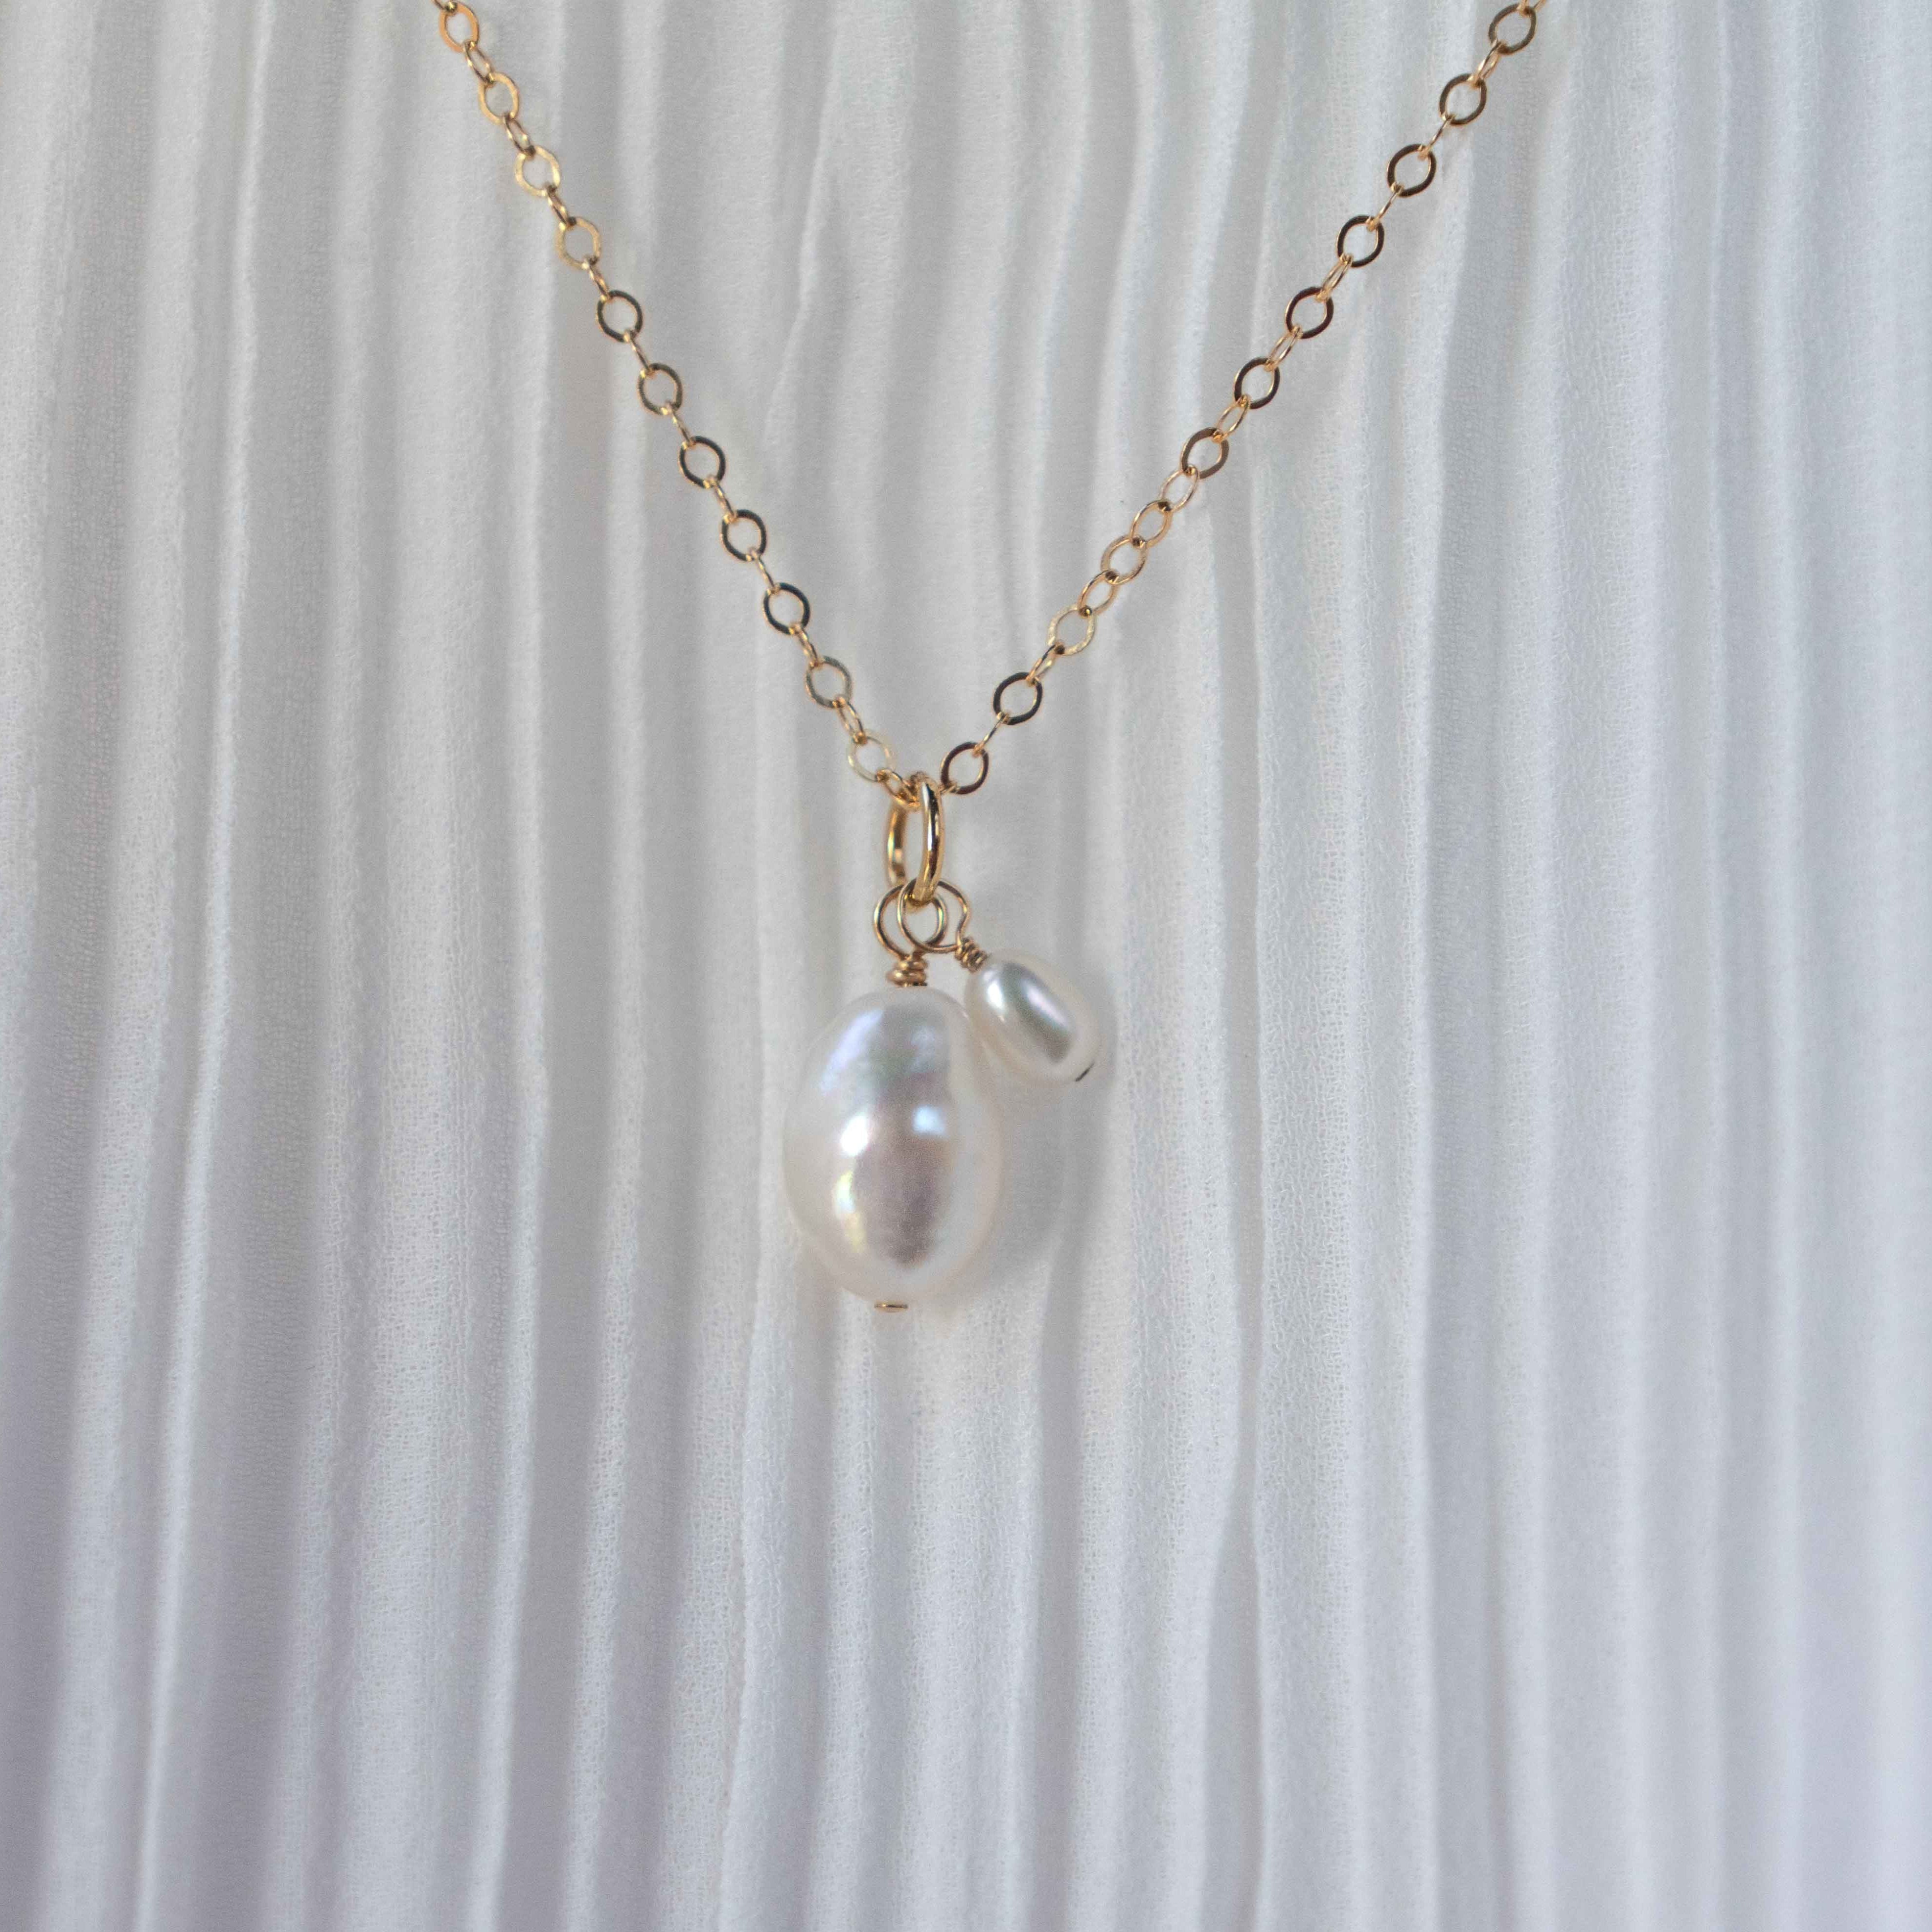 Mother Daughter Necklace, Mothers Day Gift, Gift for Mom, Gift for New Moms, Mom Gifts, Pearl Necklace